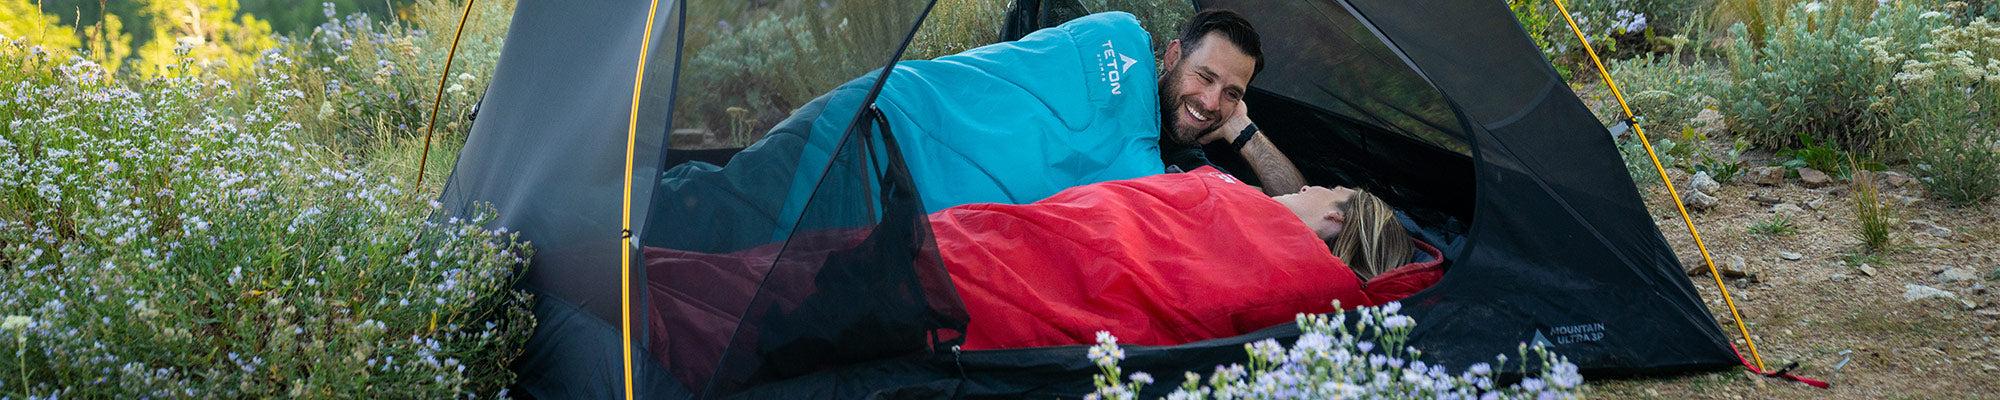 A couple talk together from inside their Mountain Ultra Tent while inside their new Celsius Sleeping Bags.